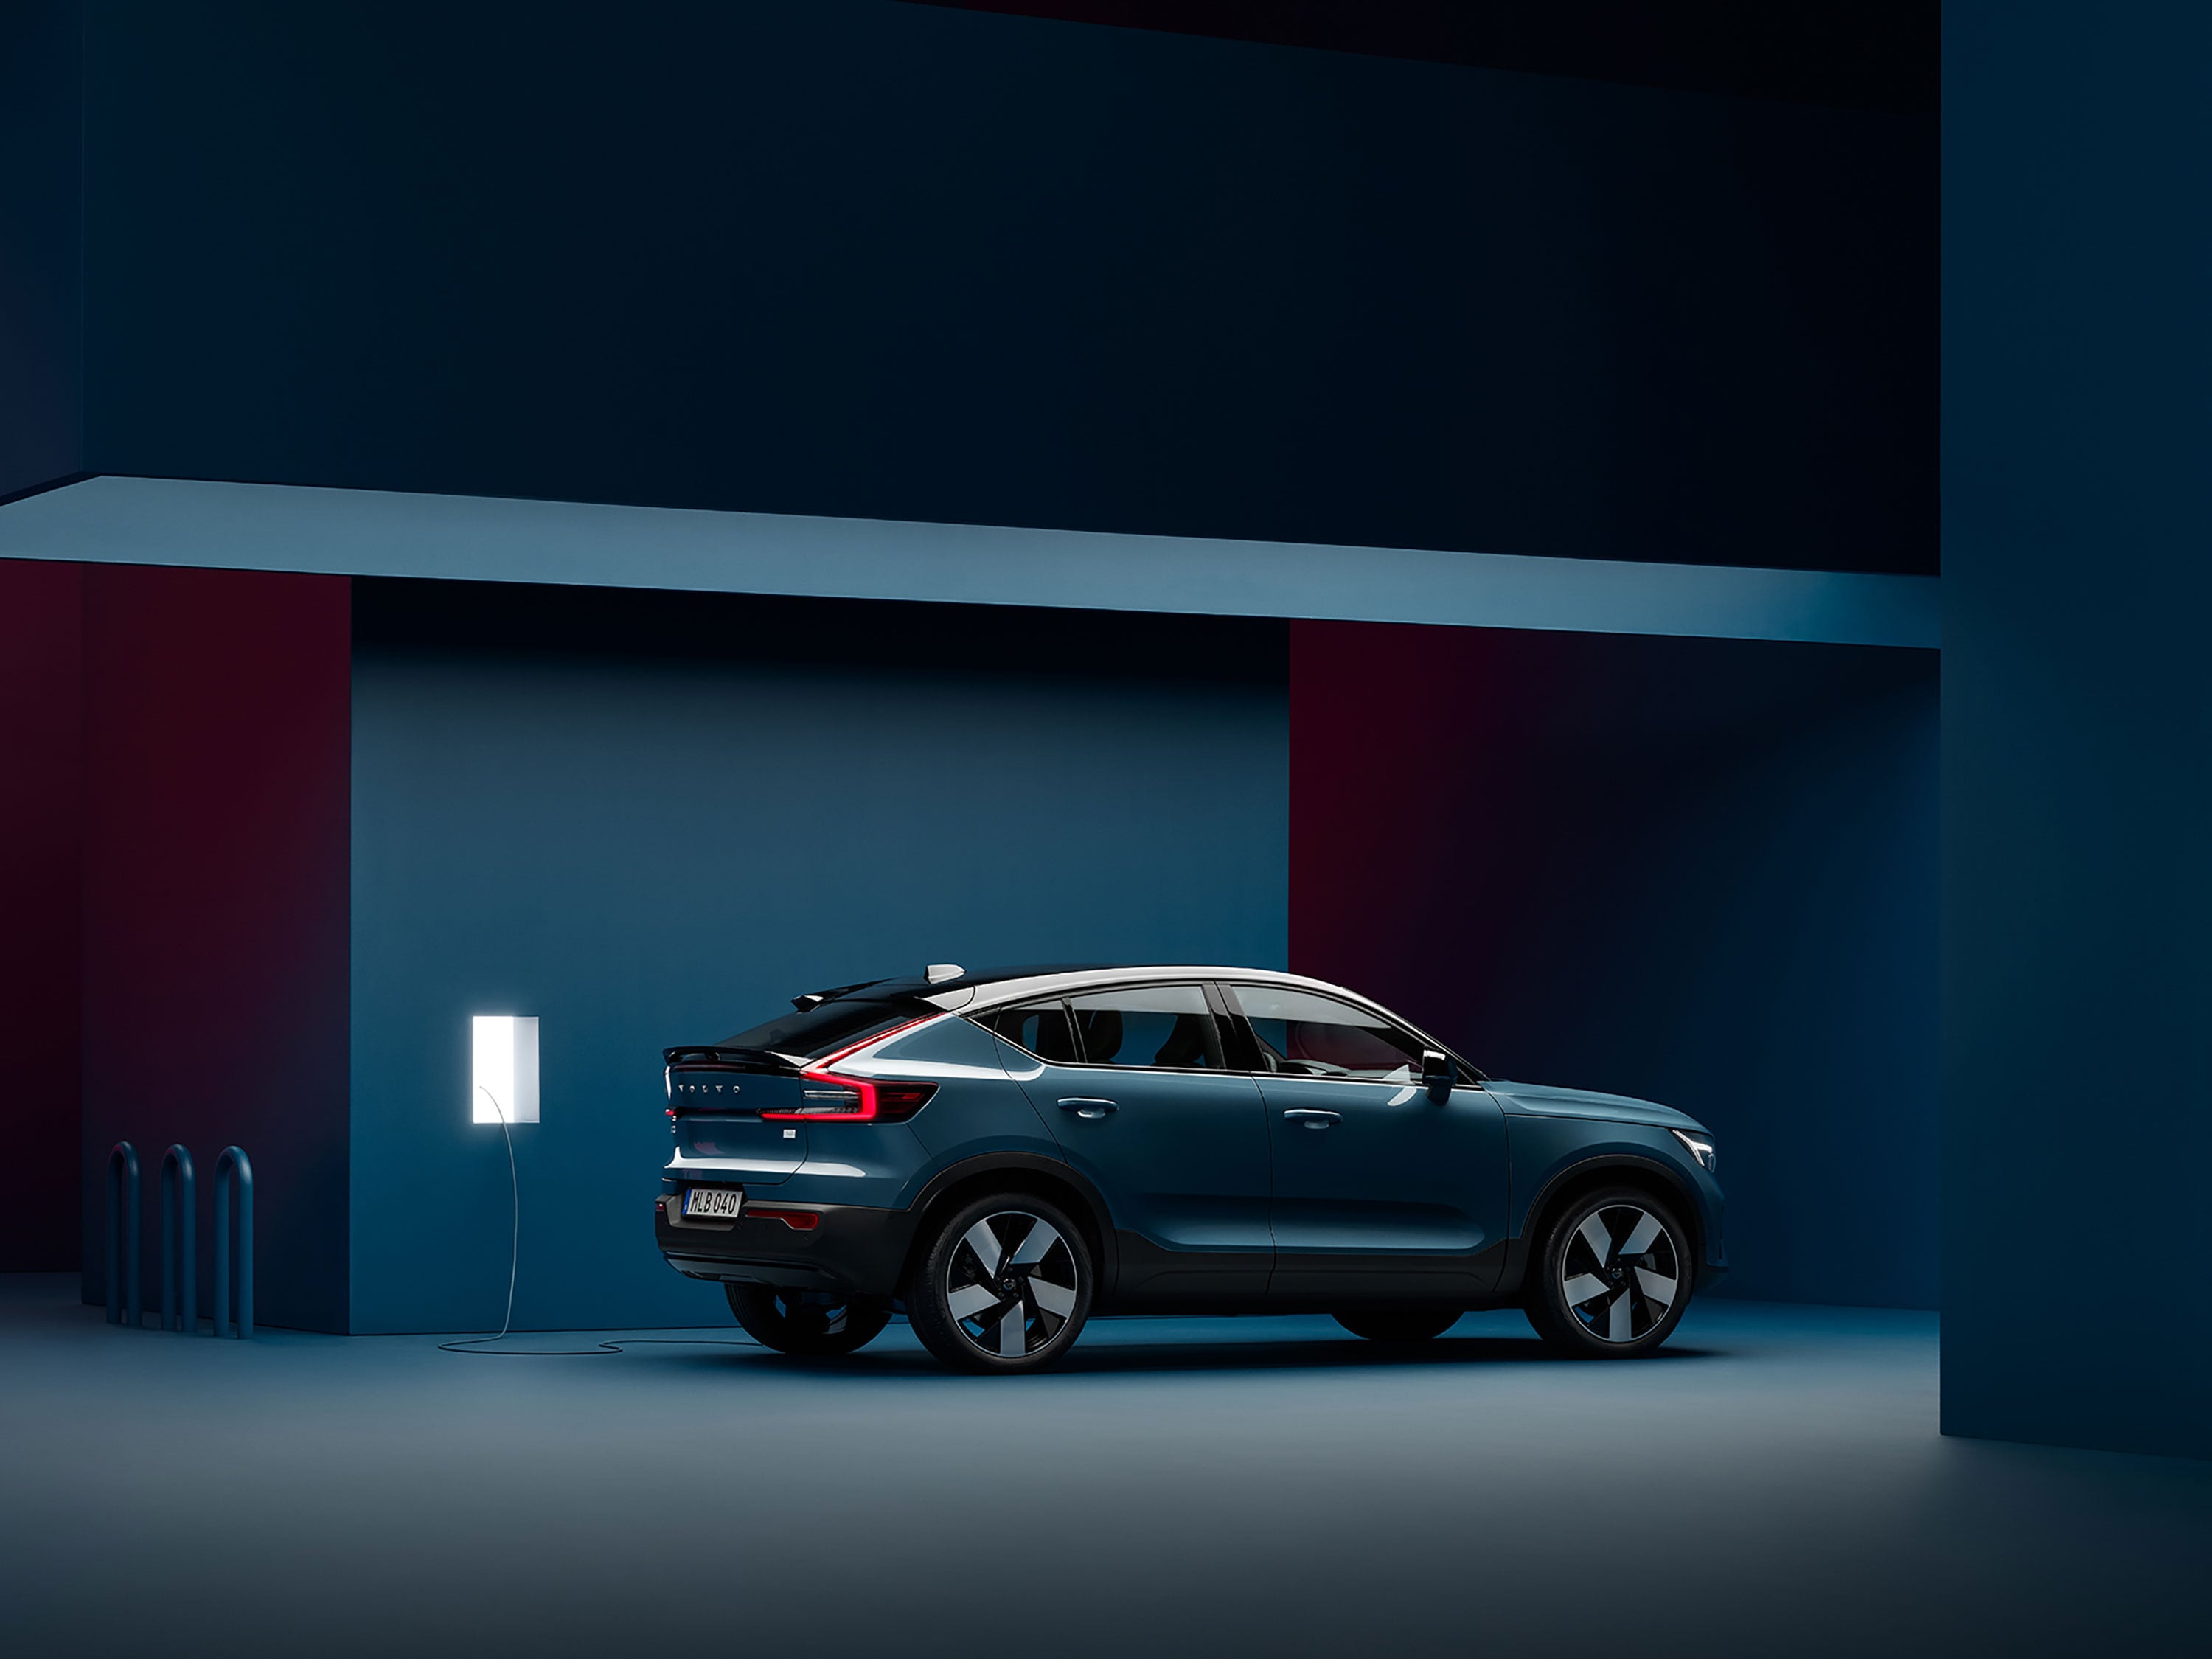 A Volvo C40 Recharge is parked in a dark blue room next to a charging station.